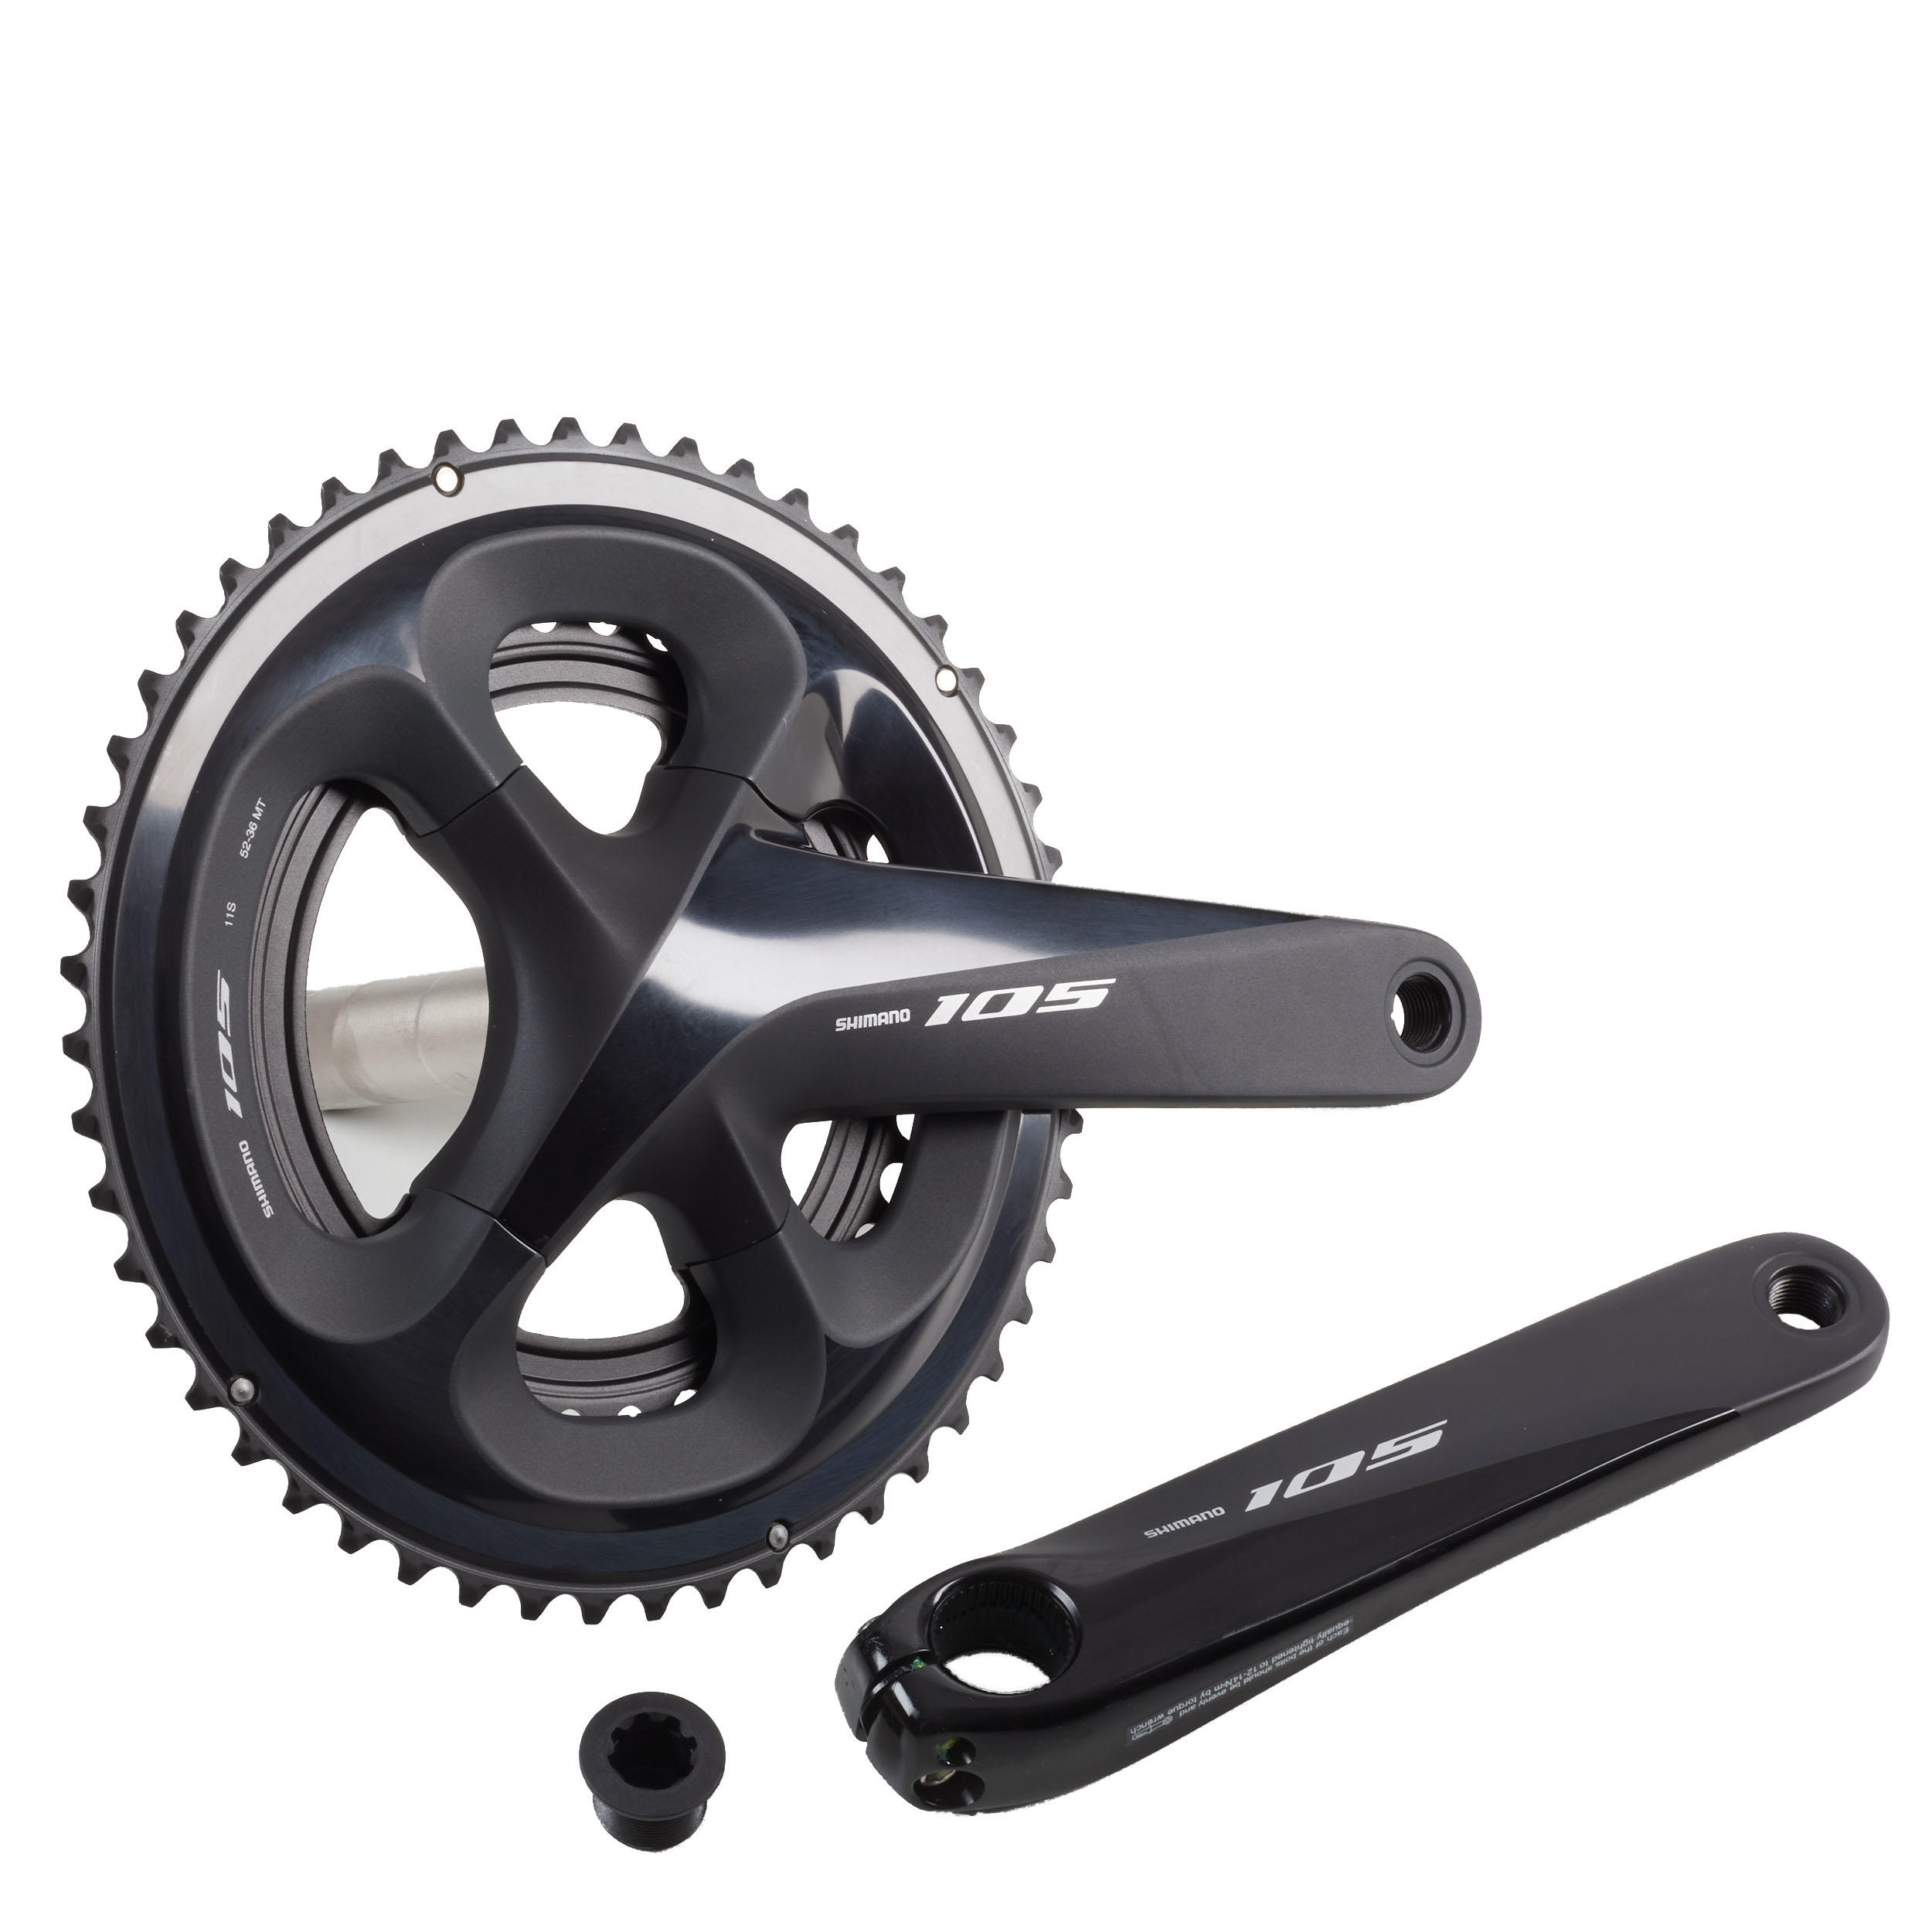 chainset sizes